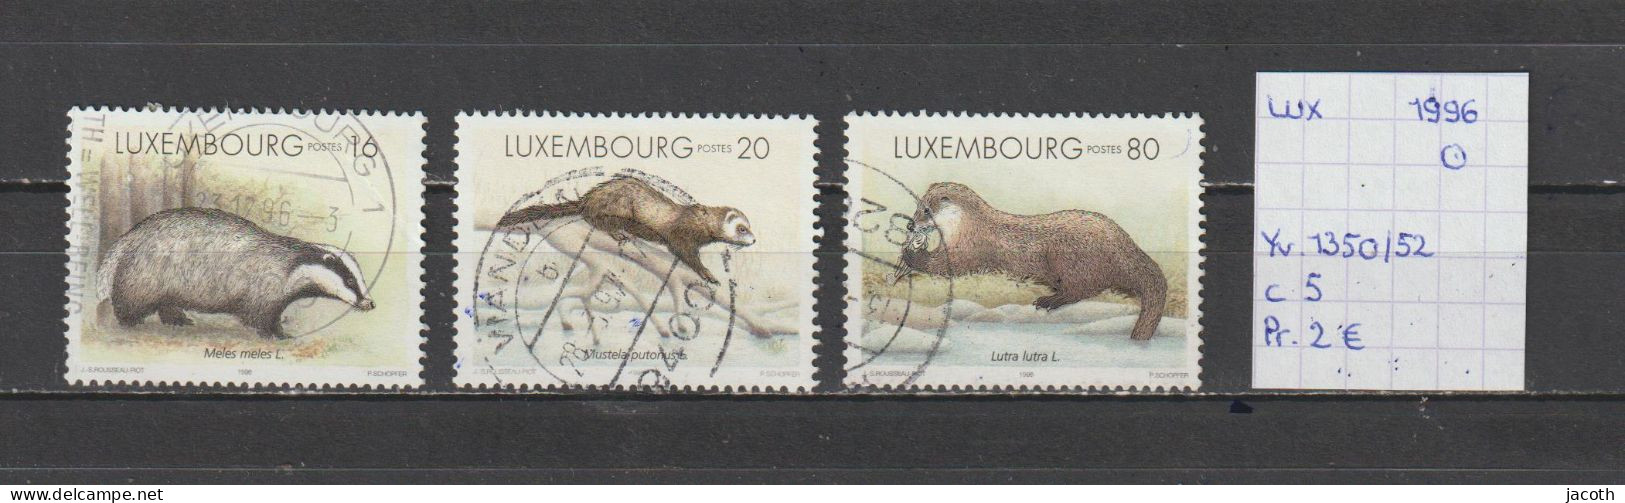 (TJ) Luxembourg 1996 - YT 1350/52 (gest./obl./used) - Gebraucht